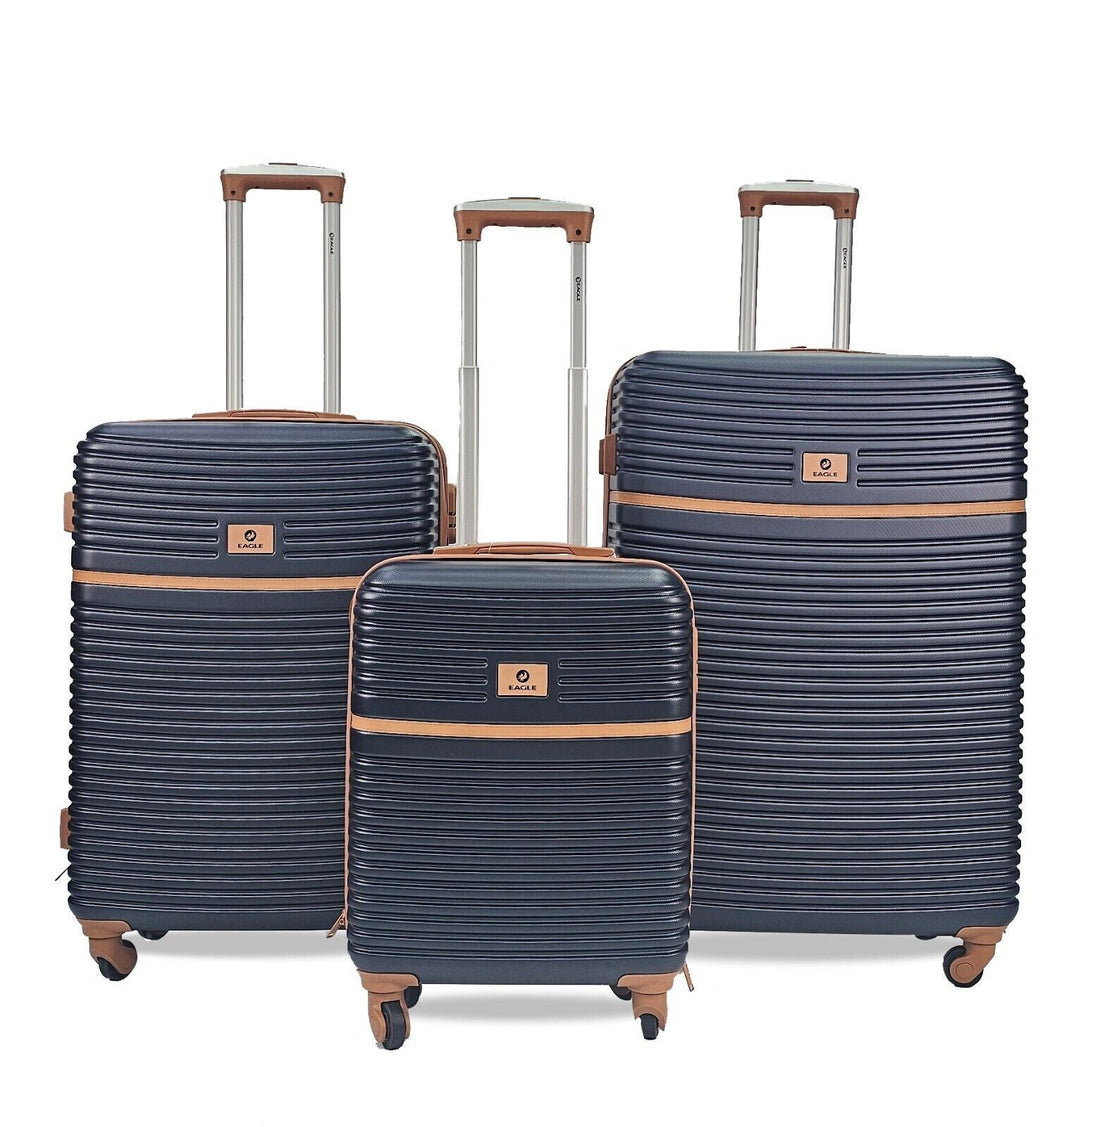 Hardshell Cabin Navy Suitcase Set Robust 4 Wheel ABS Luggage Travel Bag - Upperclass Fashions 